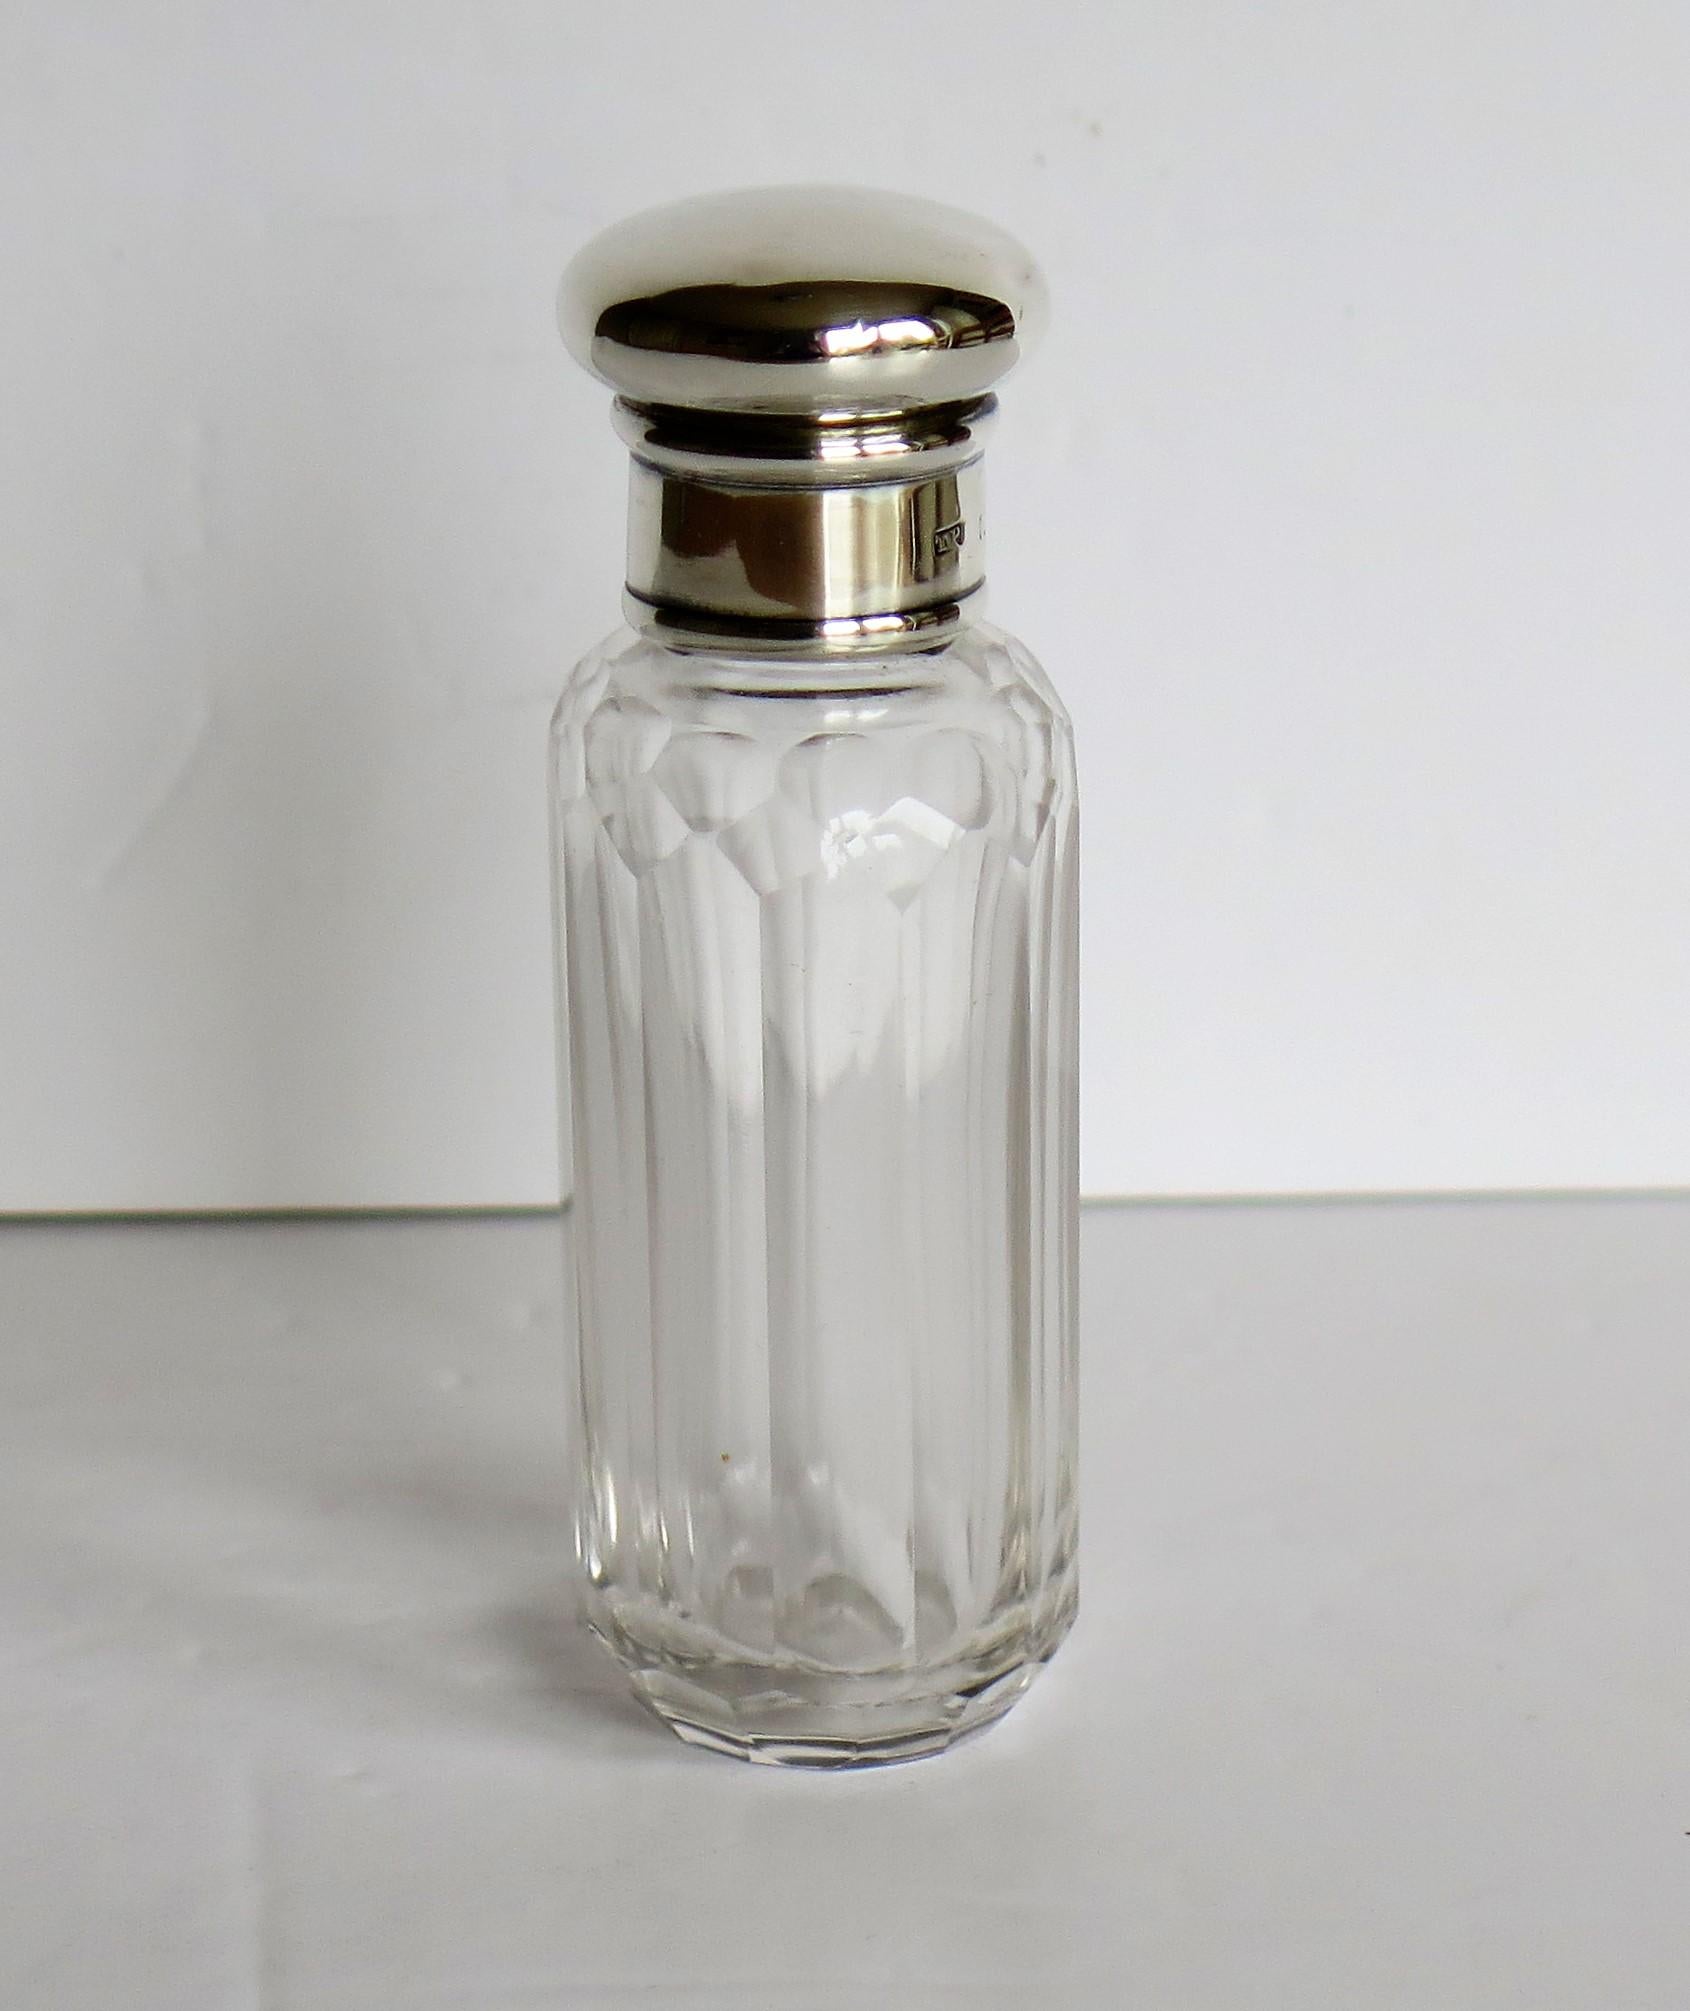 20th Century Crystal Glass Cologne or Perfume Bottle with Sterling Silver Top, London, 1926